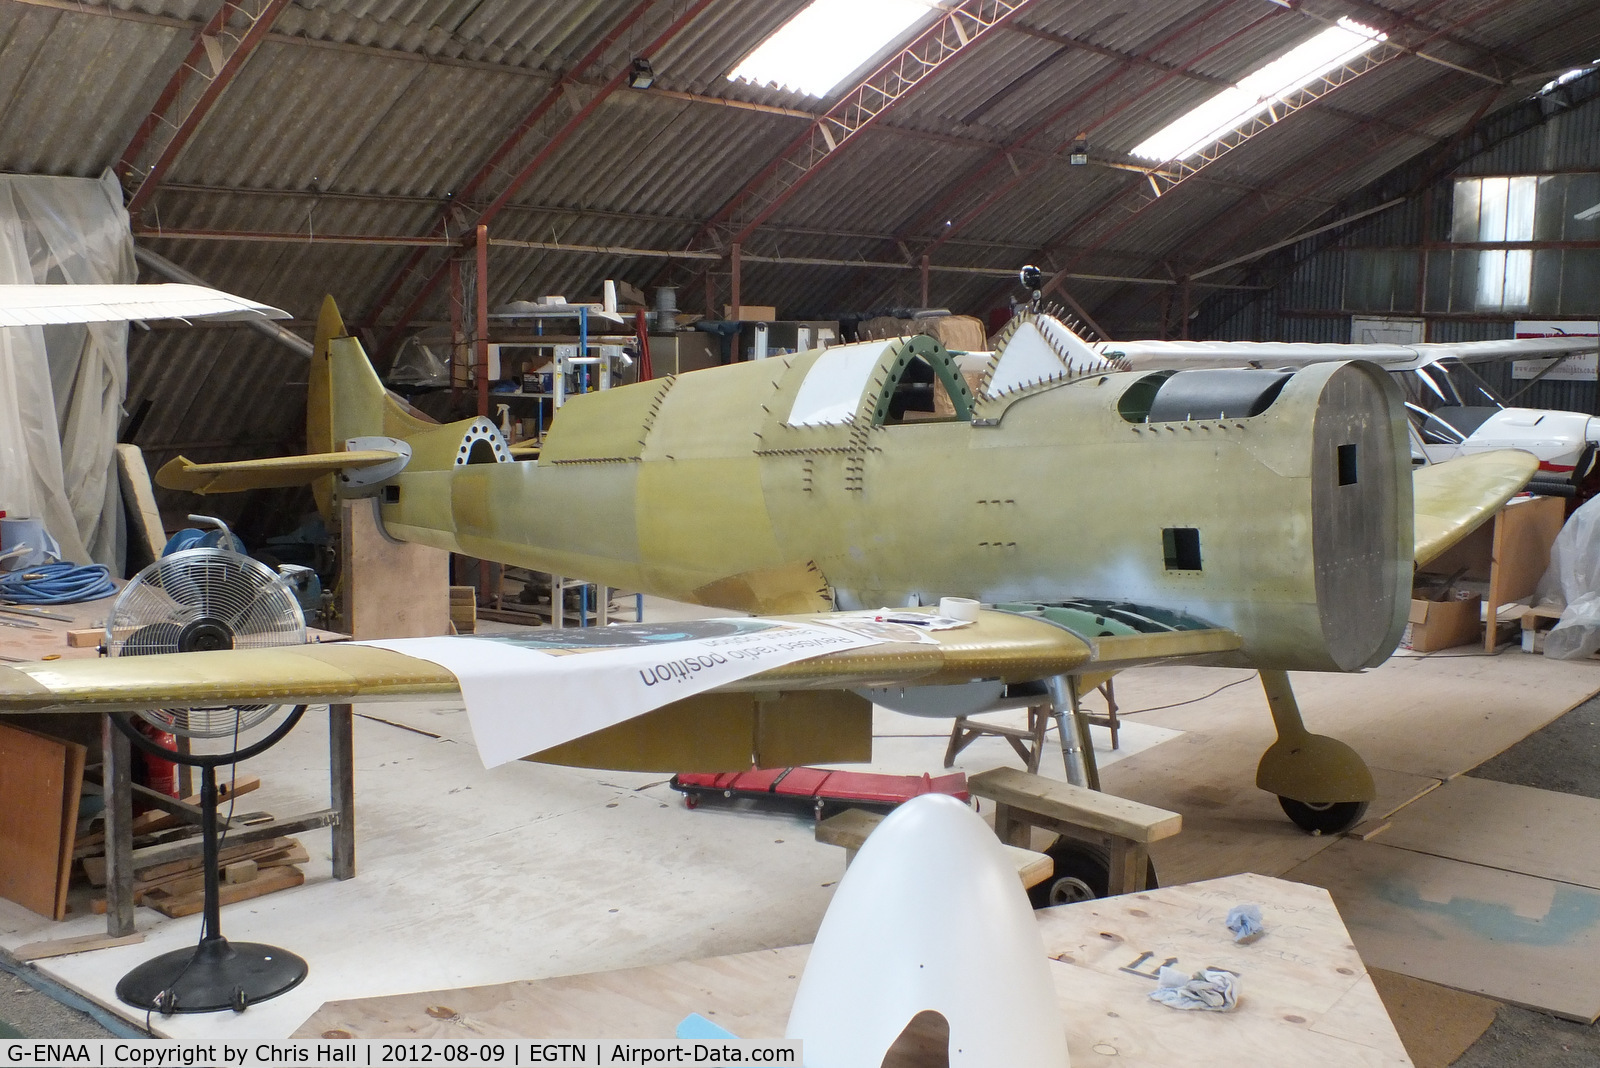 G-ENAA, 2013 Supermarine Aircraft Spitfire Mk.26B C/N LAA 324-15097, 2 seat Supermarine Spitfire MK26B under construction at Enstone Airfield. This is part of the ambitious plan by the Enstone Flying Club to build 12 Spitfire replicas and form a squadron which will display at airshows and events around the country.